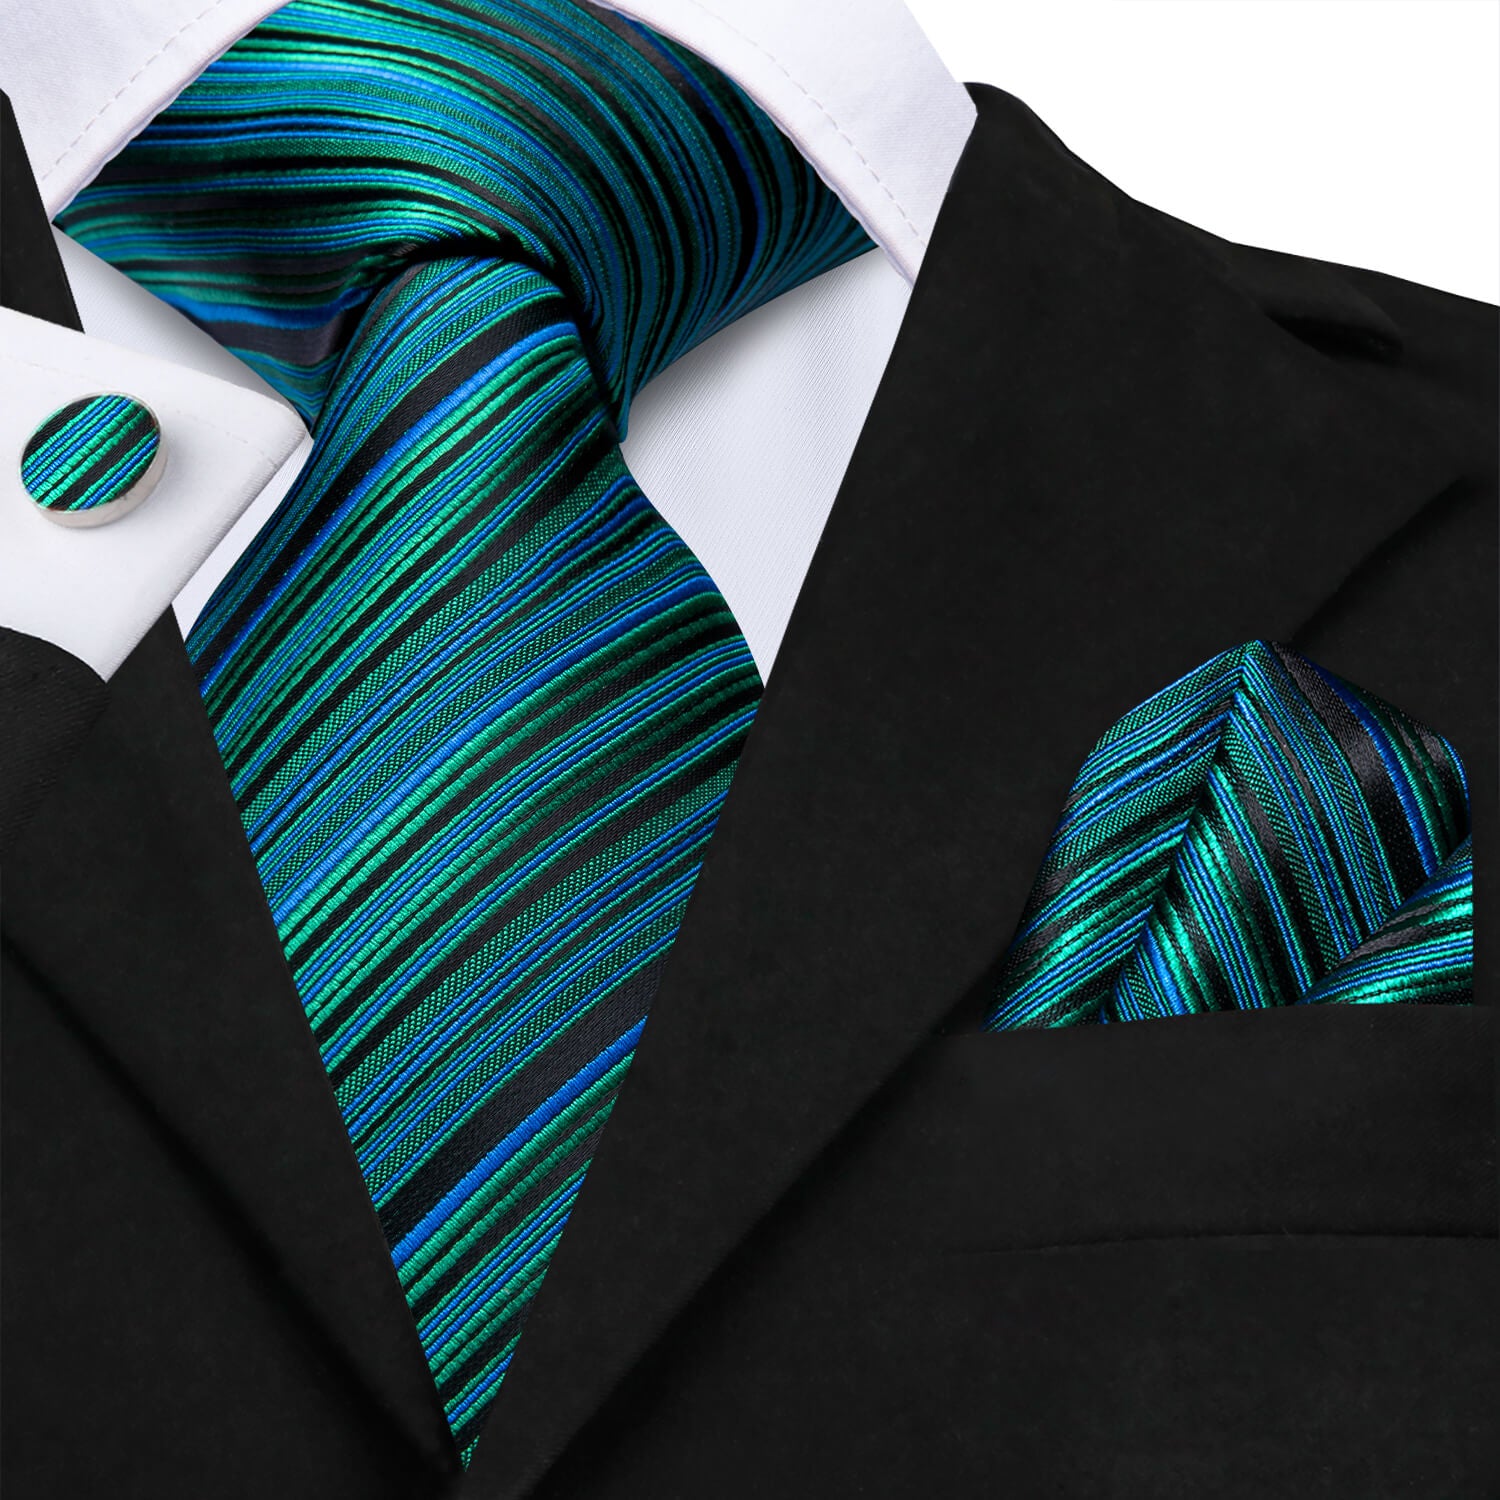 Hi-Tie Striped Teal Tie with Pocket Square and Cufflinks